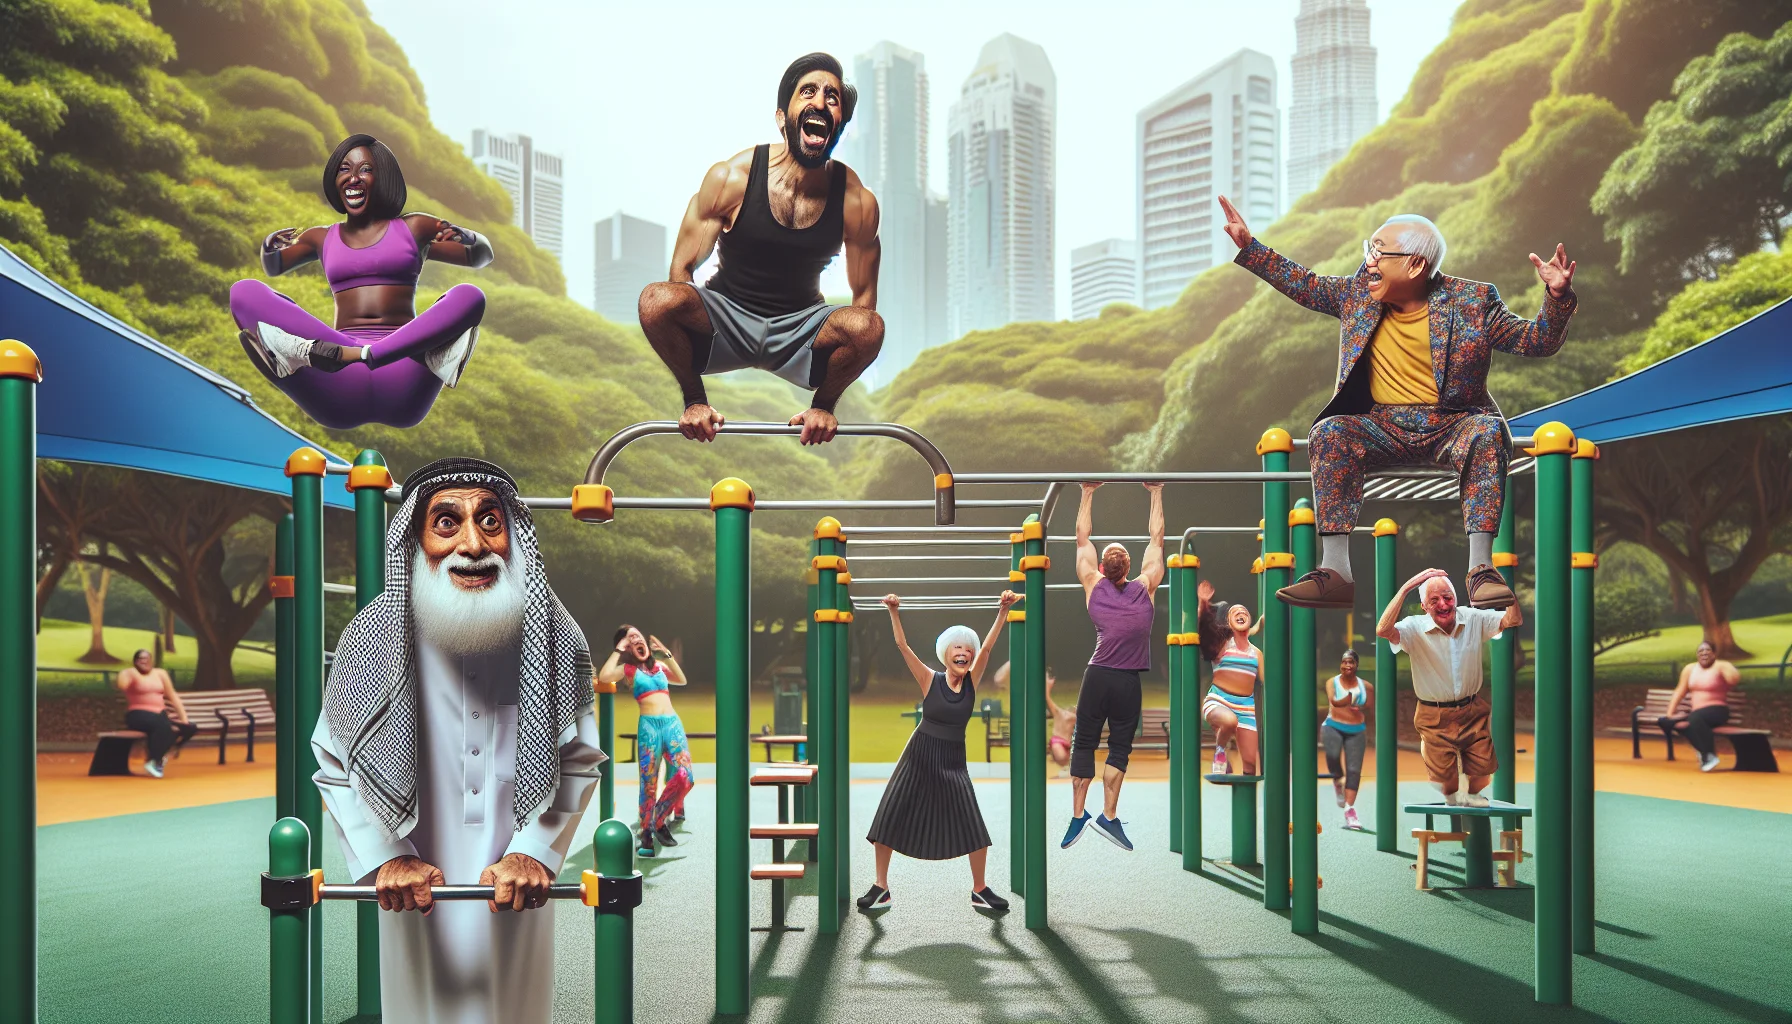 Create a humorous, enthralling scene of a calisthenics park. Imagine a mixture of different people including a Middle-Eastern man balancing on his nose on the monkey bars, a South-Asian woman laughing while attempting pull-ups and a Caucasian man comically stuck in the middle of a push-up. Feel the vibrant atmosphere, with people wearing colorful gym clothing, and the perfectly maintained, inviting exercise equipment placed amid greenery. To increase the fun factor, add a group of elderly Black women energetically and cheerfully participating in a Zumba class in the corner of the park.